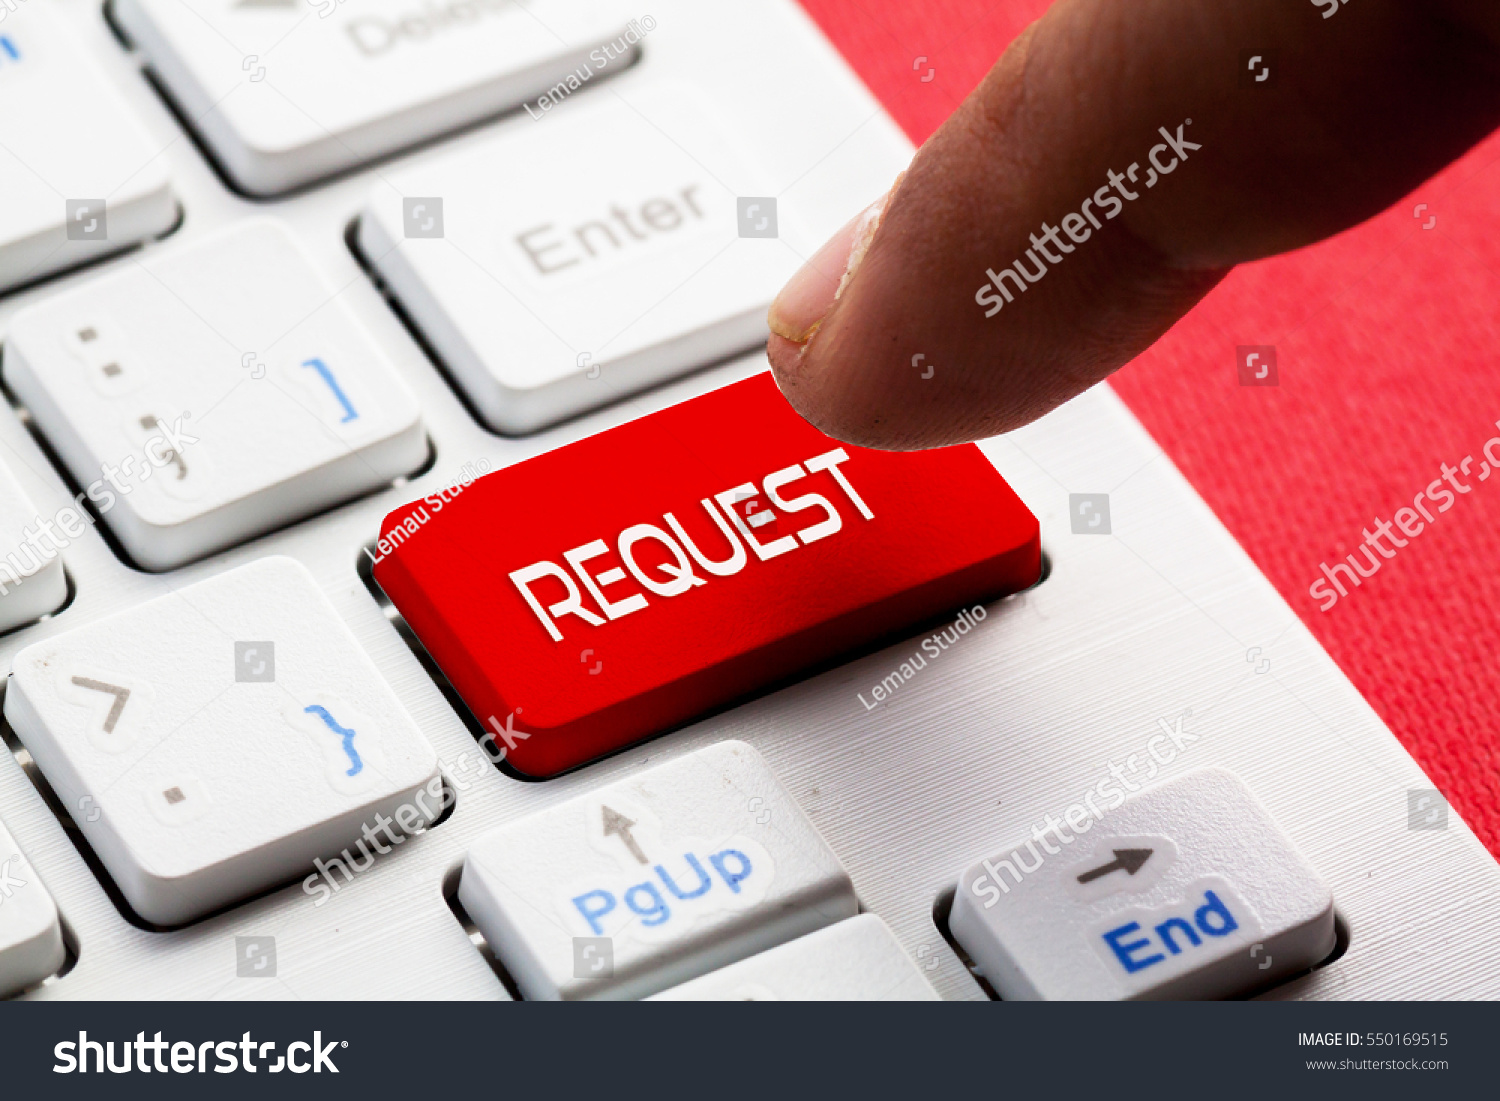 REQUEST word concept button on keyboard #550169515